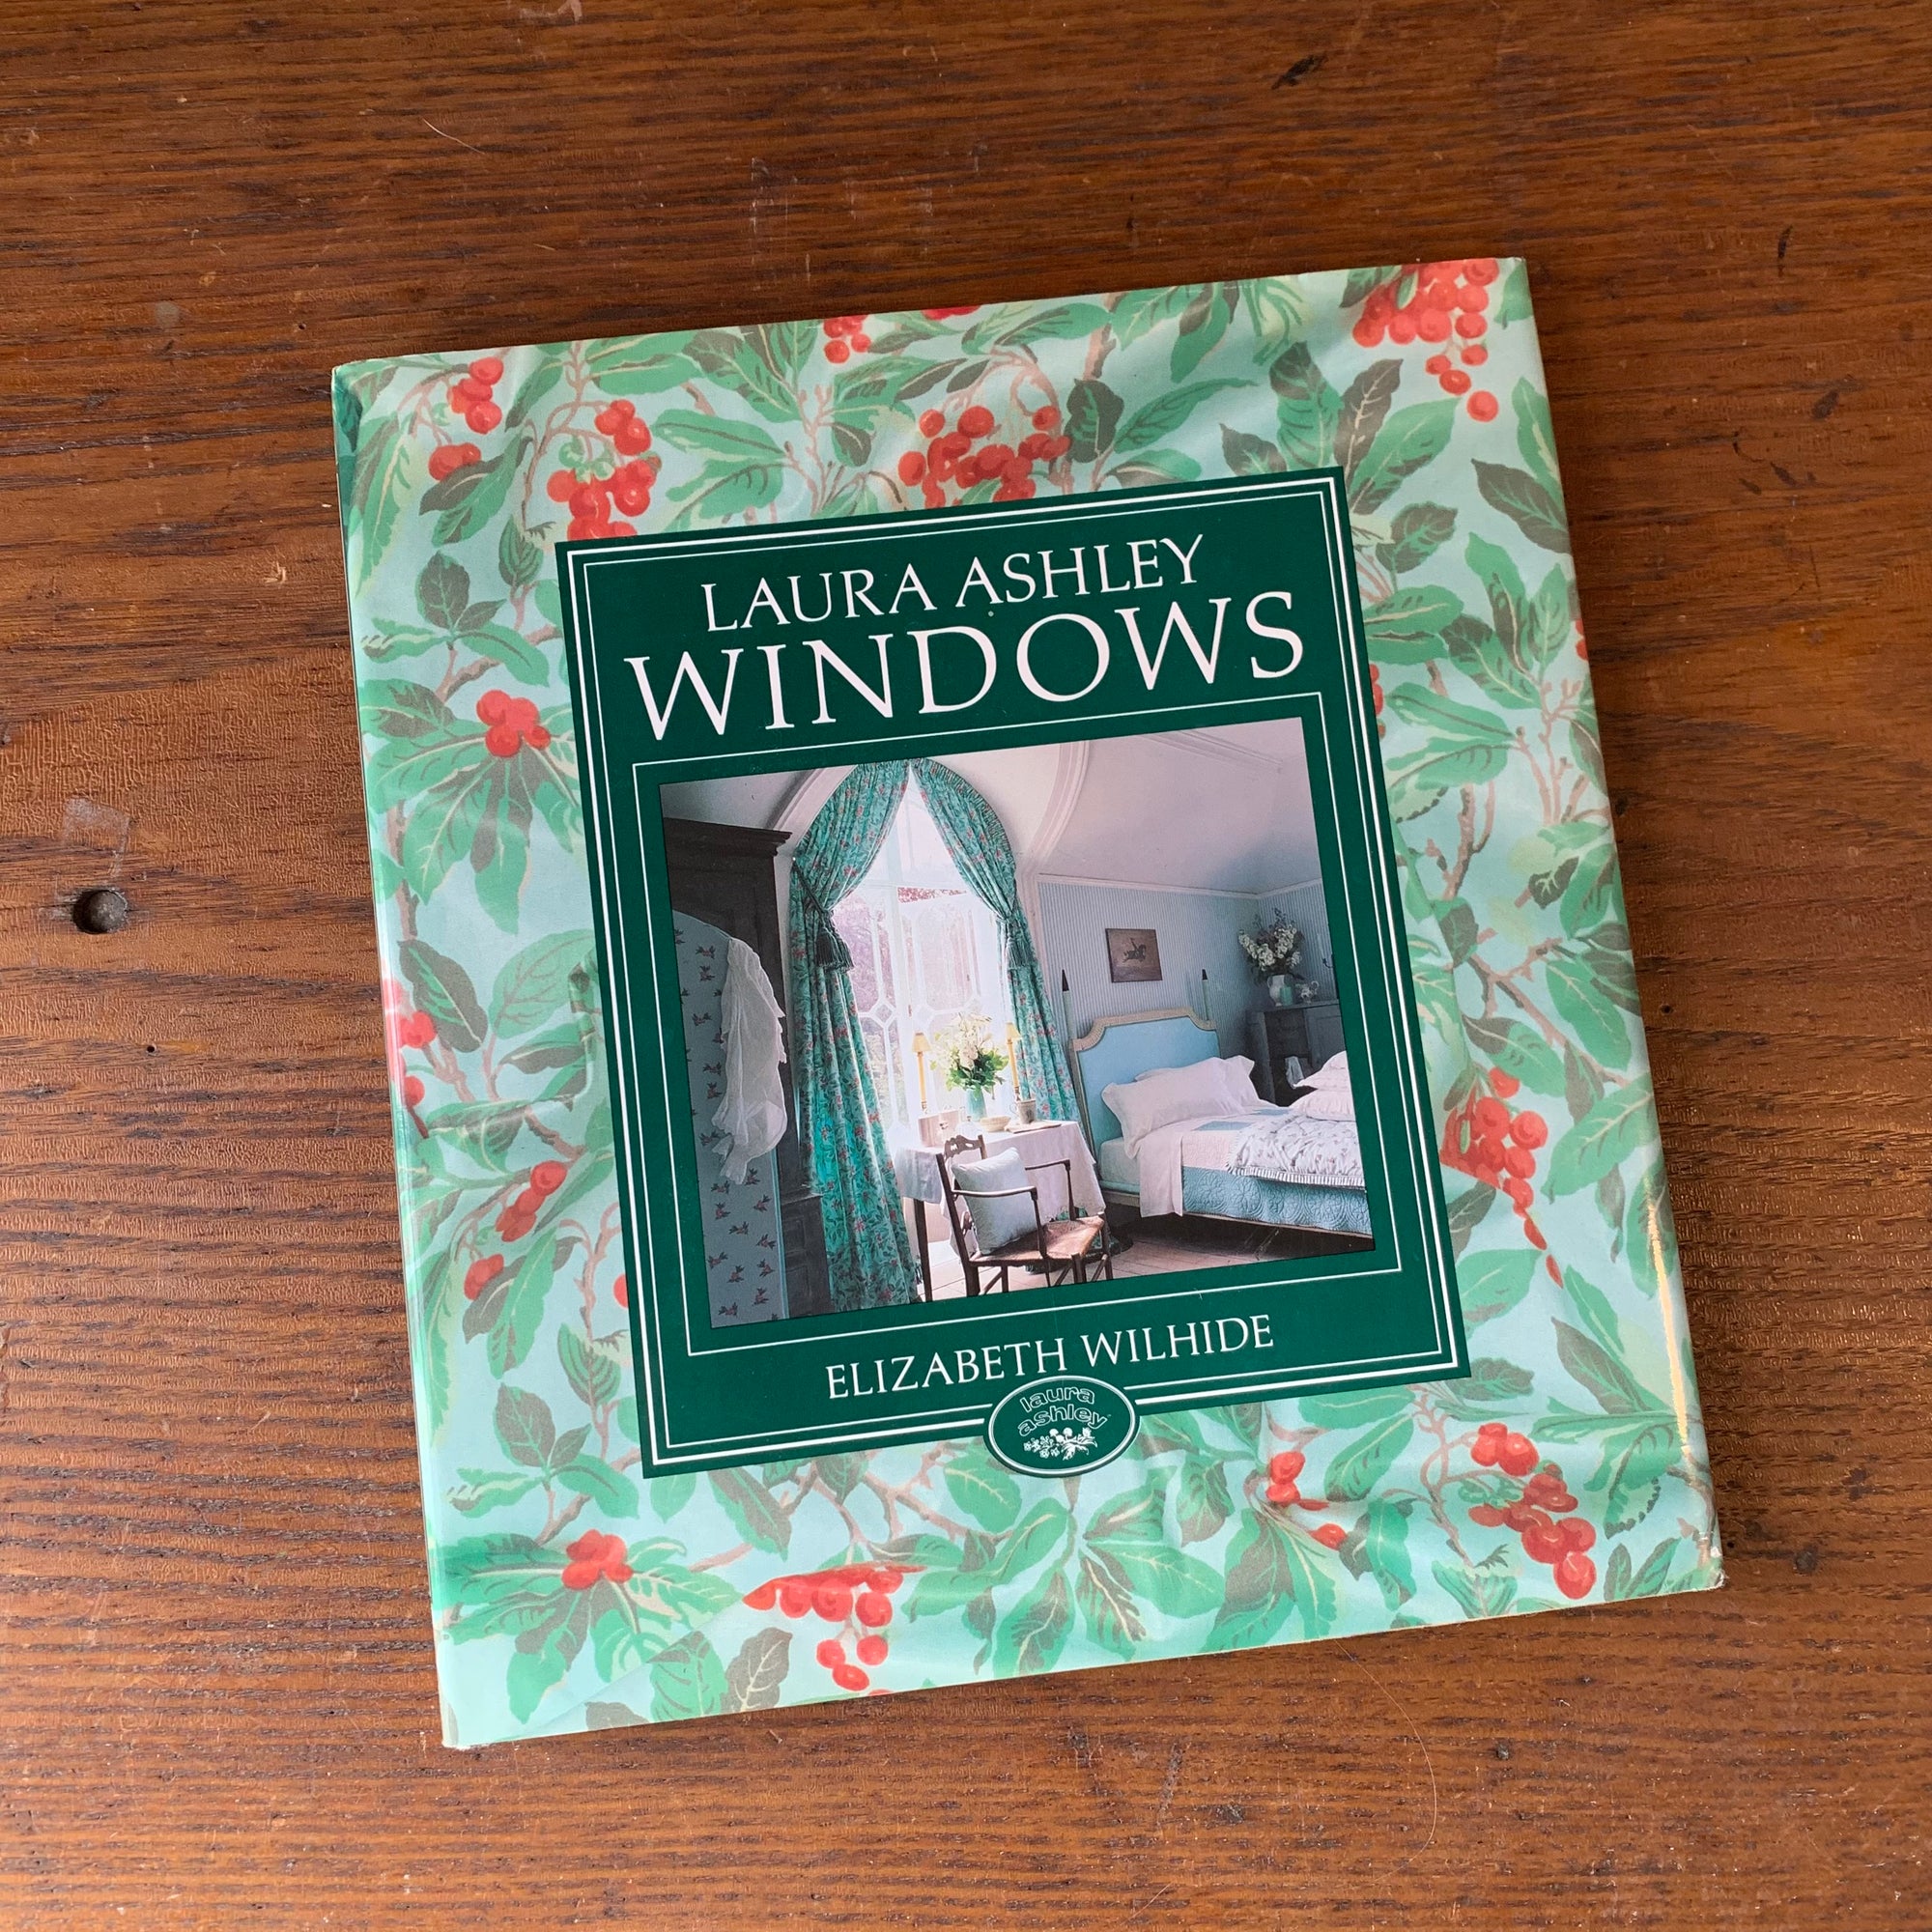 Laura Ashley Windows - First Edition with Dust Jacket - Queen of Cottage Core